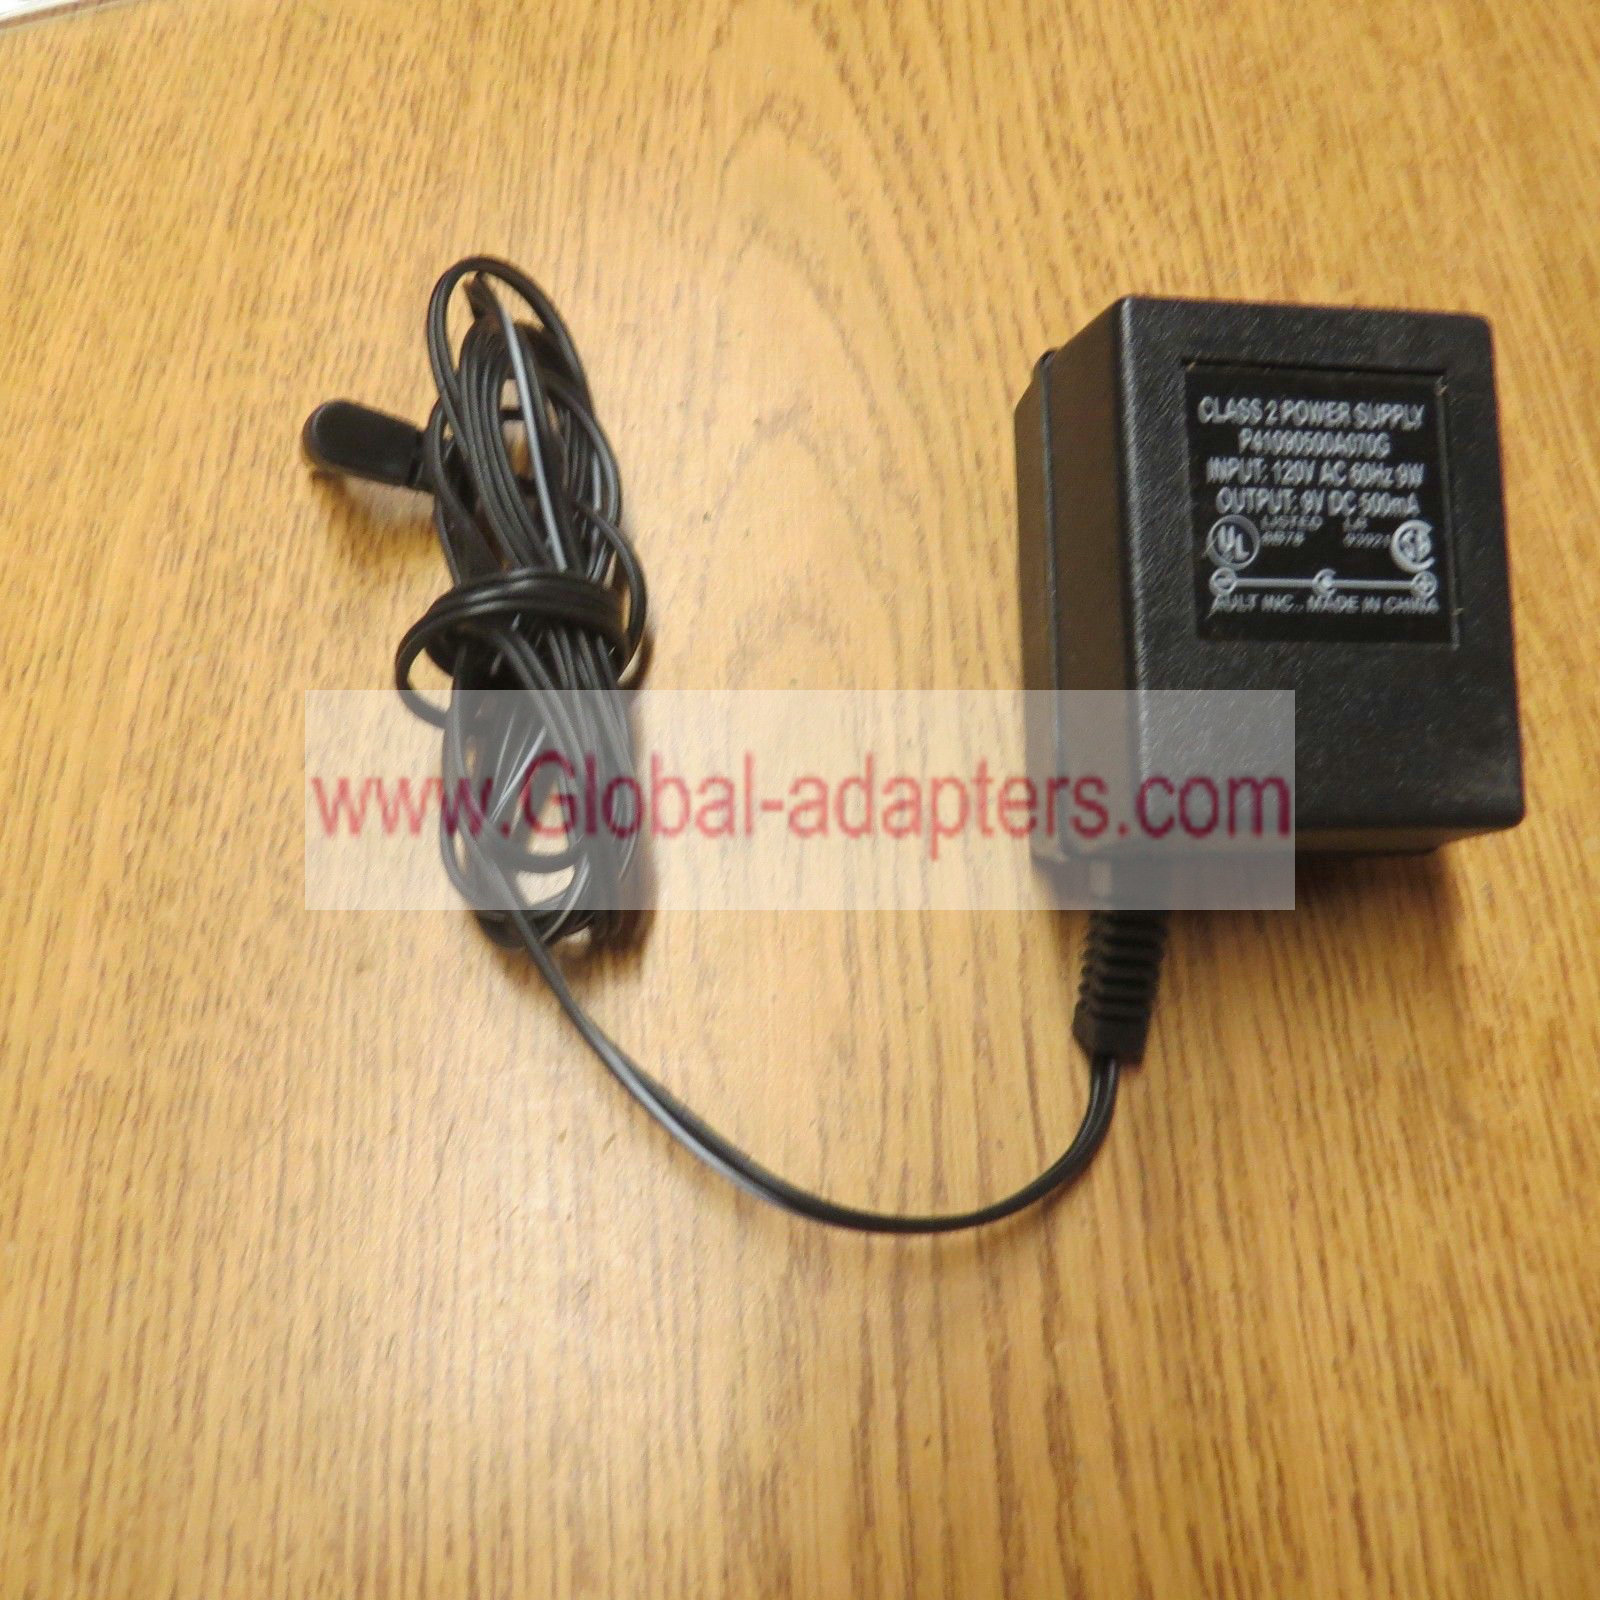 New AULT P41090500A070G Class 2 power supply 9VDC 500MA AC ADAPTER POWER